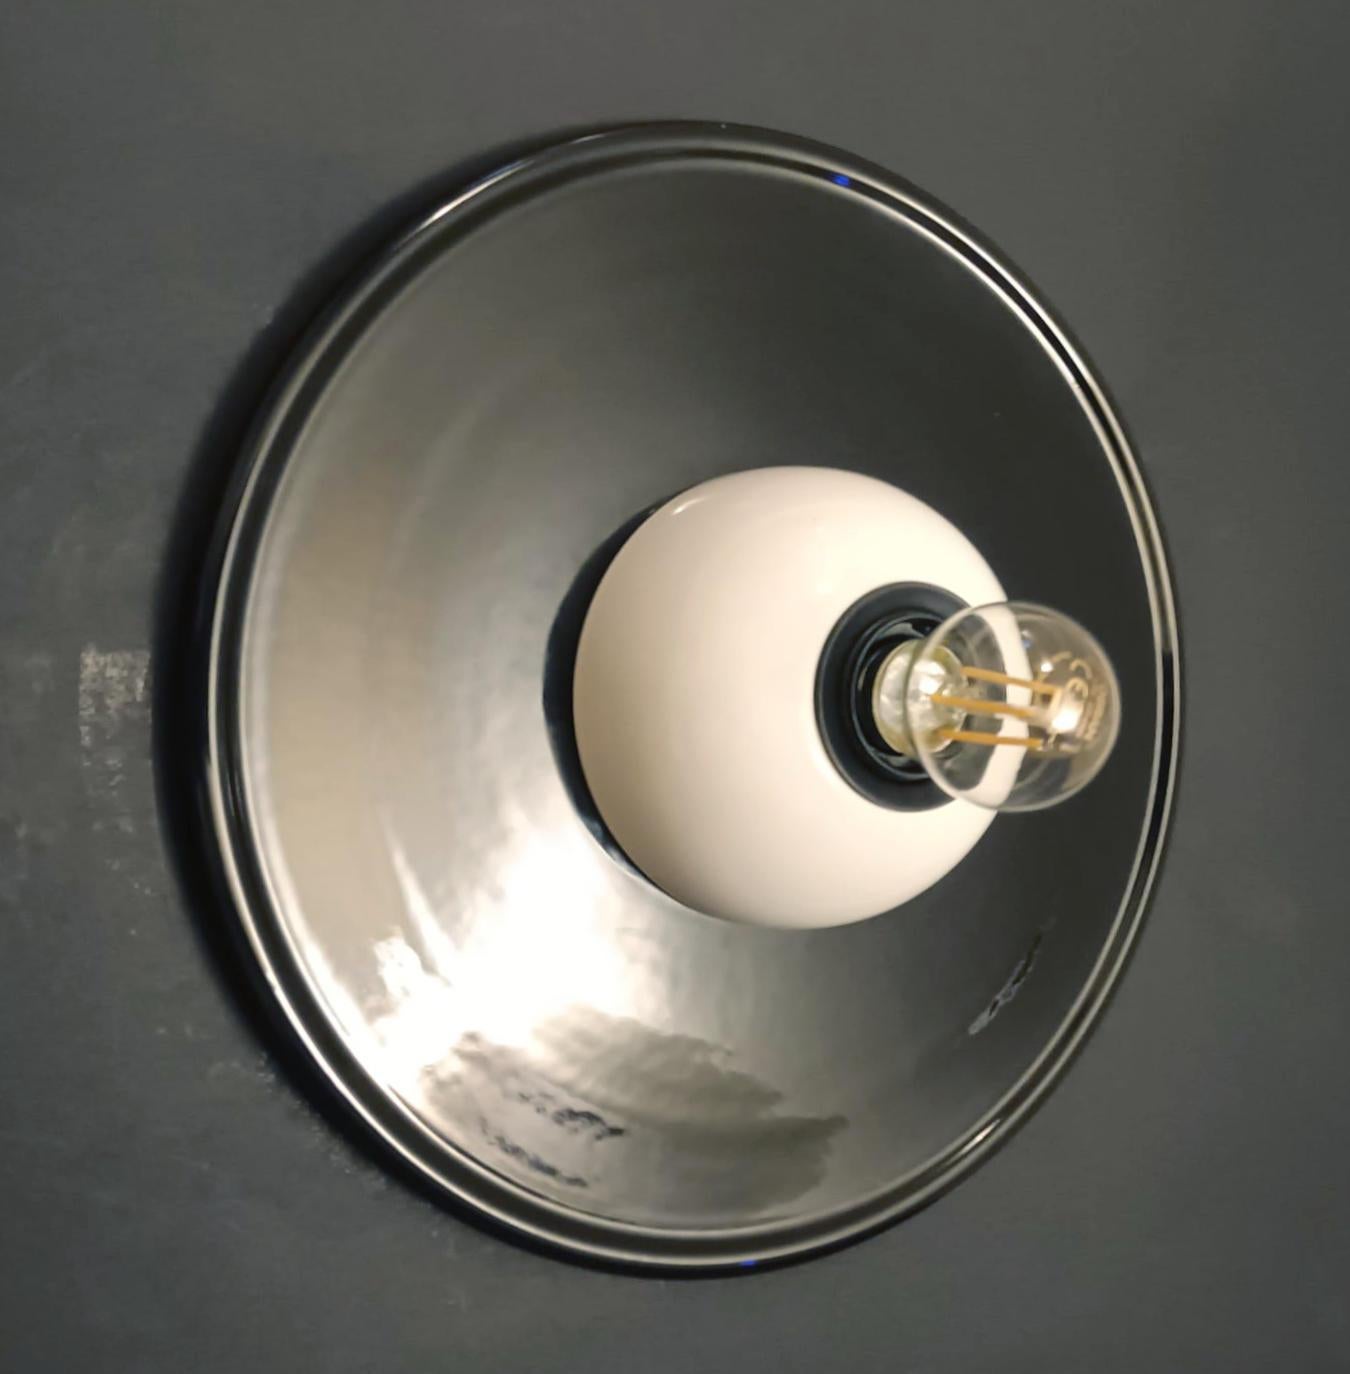 Vintage mid-century Italian wall lights or flush mounts with black and white ceramic plates / Made in Italy, circa 1960s
Measures: diameter 12 inches, depth 3 inches
1 light / E26 or E27 type / max 60W
3 Pairs available in stock in Italy, price